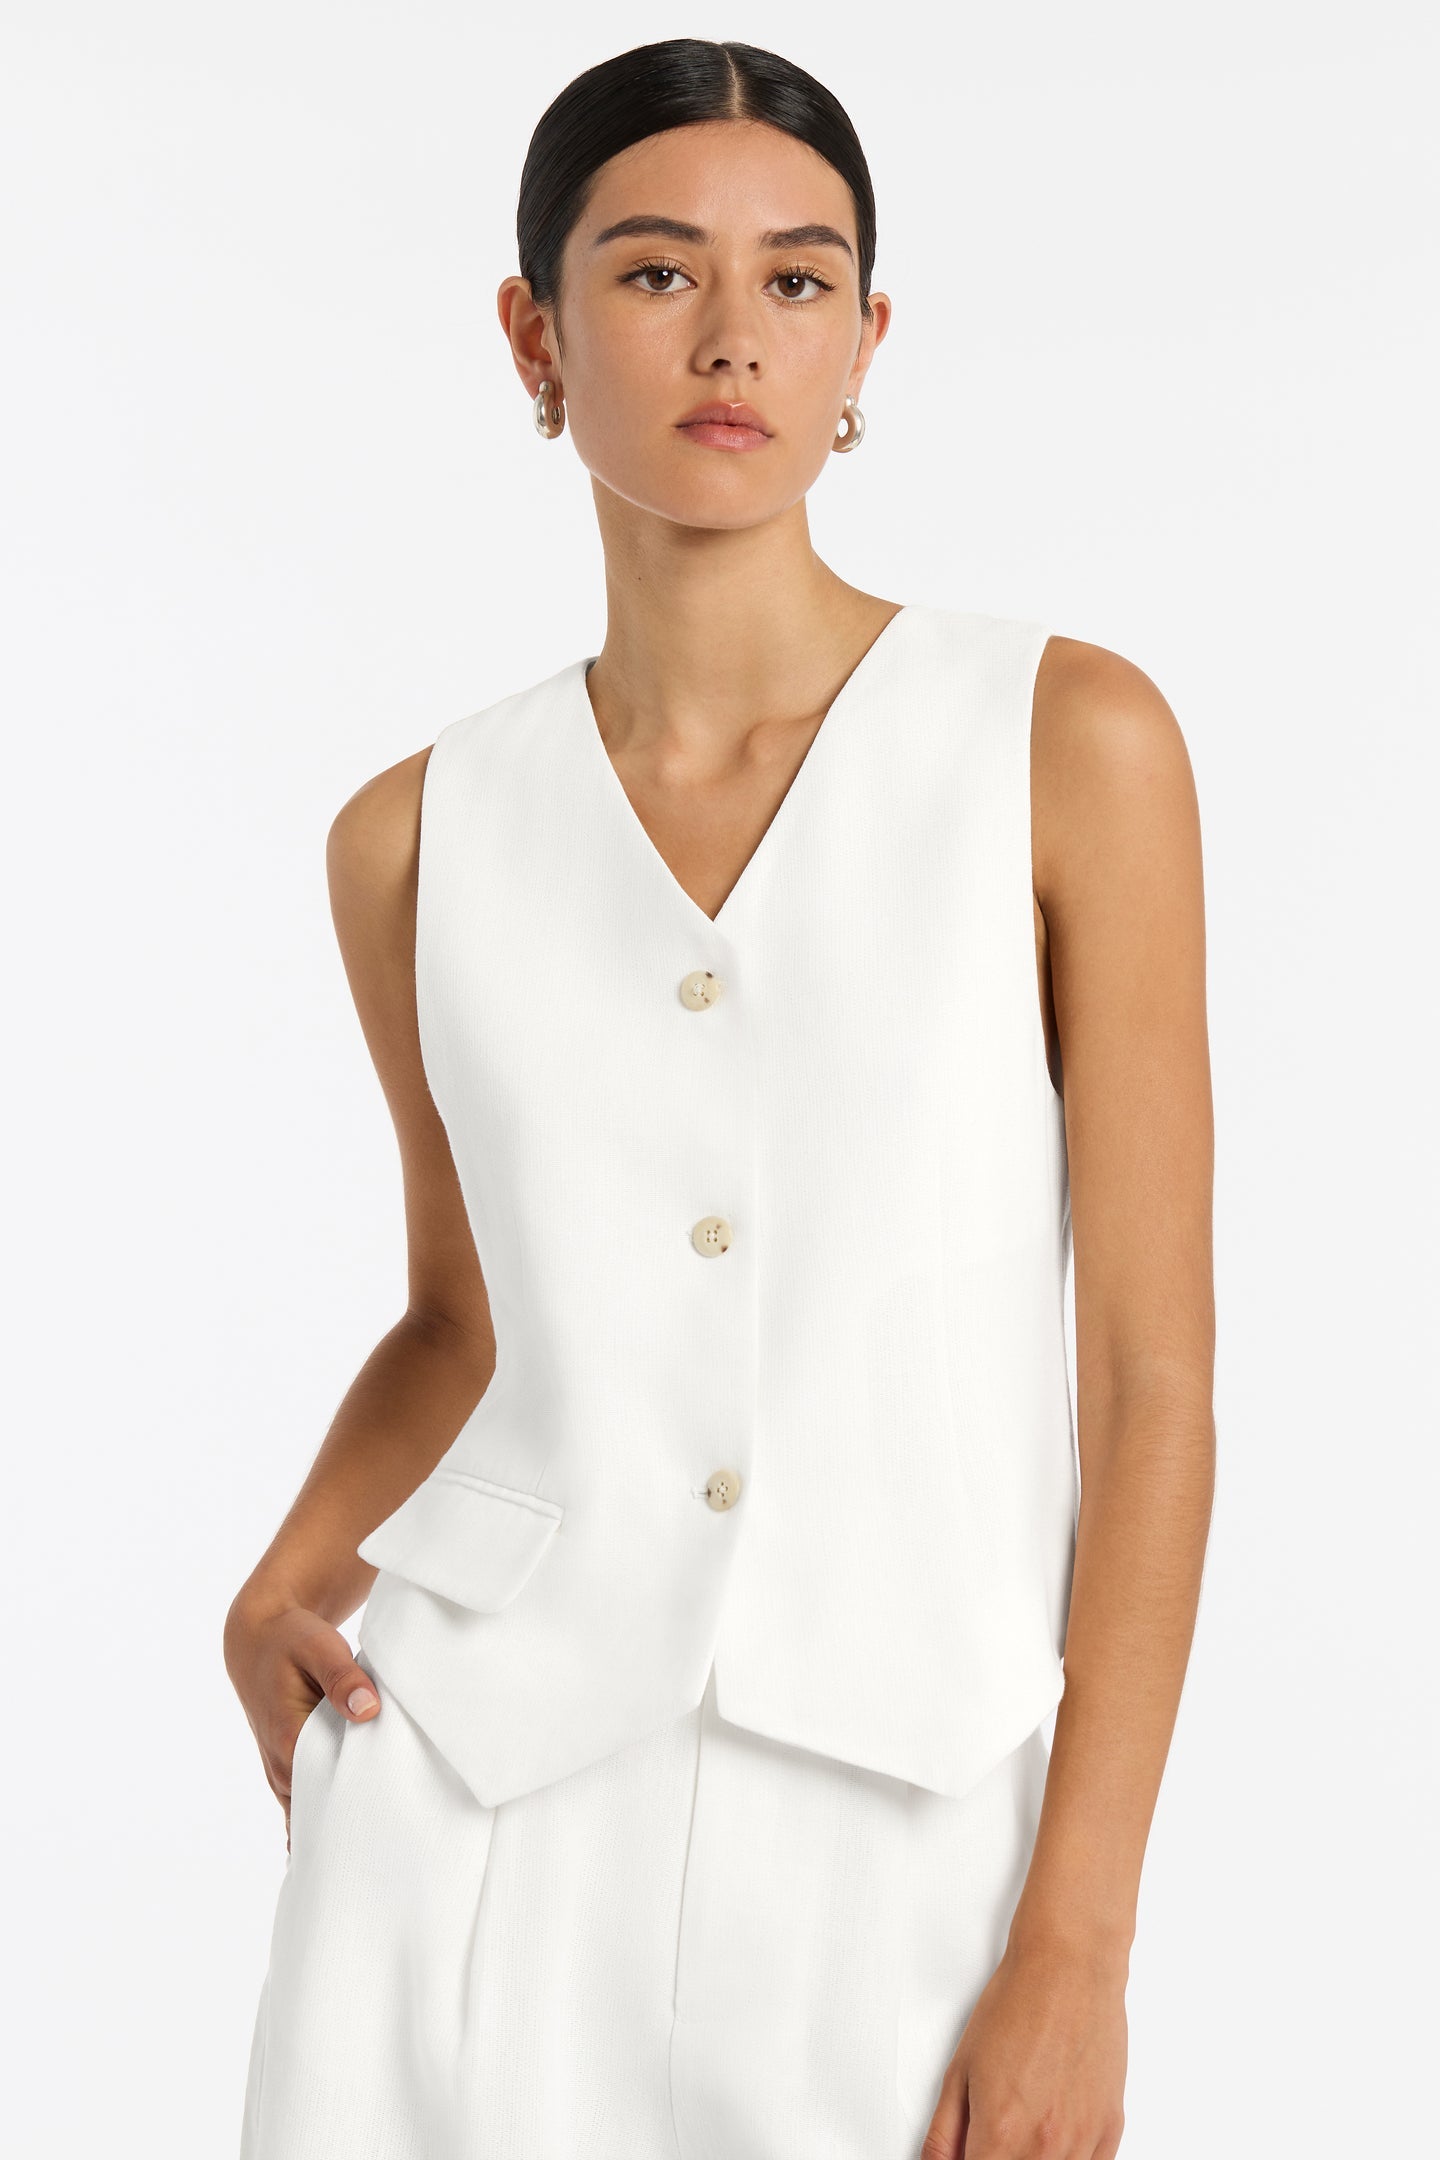 SIR Clemence Tailored Vest in Ivory available at TNT The New Trend Australia. Free shipping on orders over $300 AUD.